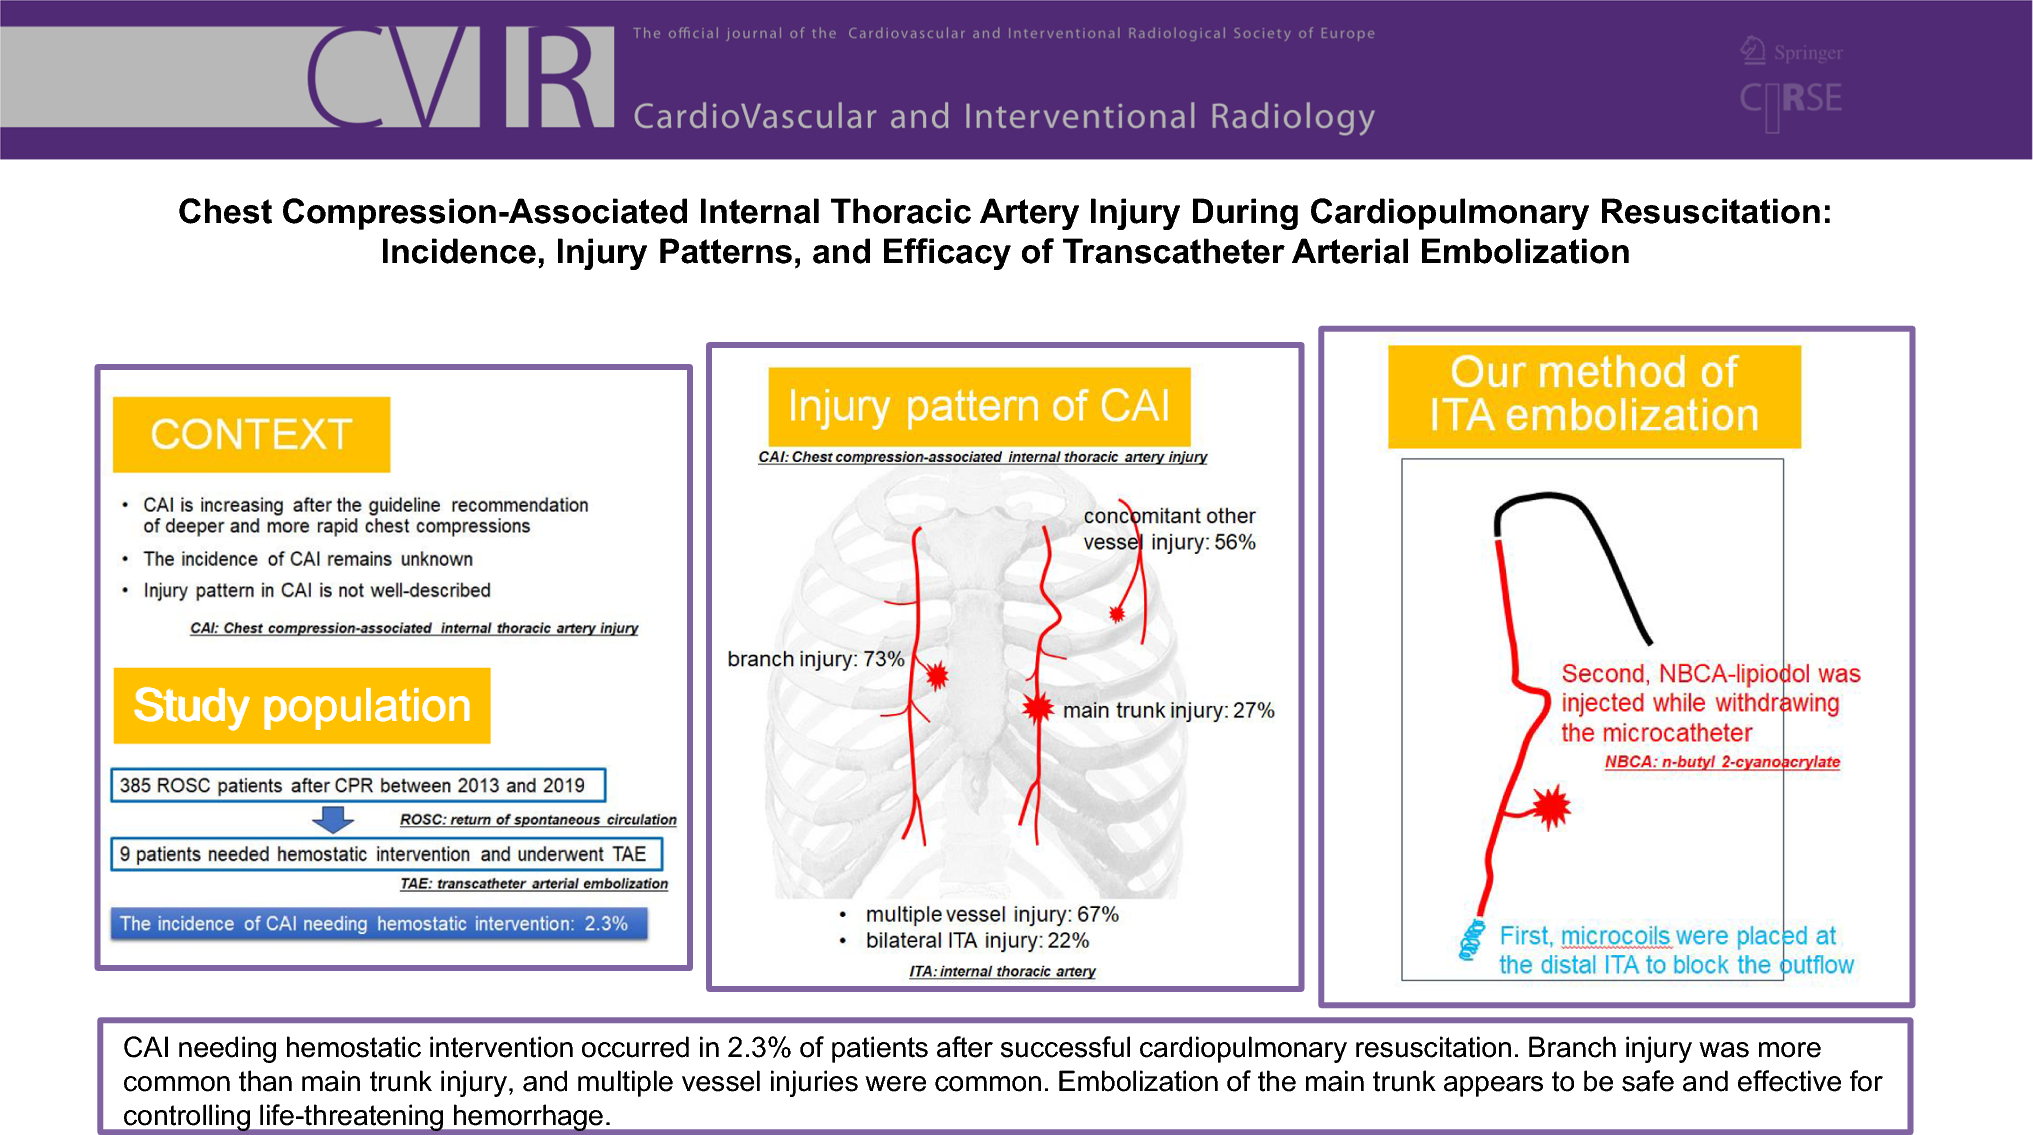 Chest Compression-Associated Internal Thoracic Artery Injury During Cardiopulmonary Resuscitation: Incidence, Injury Patterns and Efficacy of Transcatheter Arterial Embolization